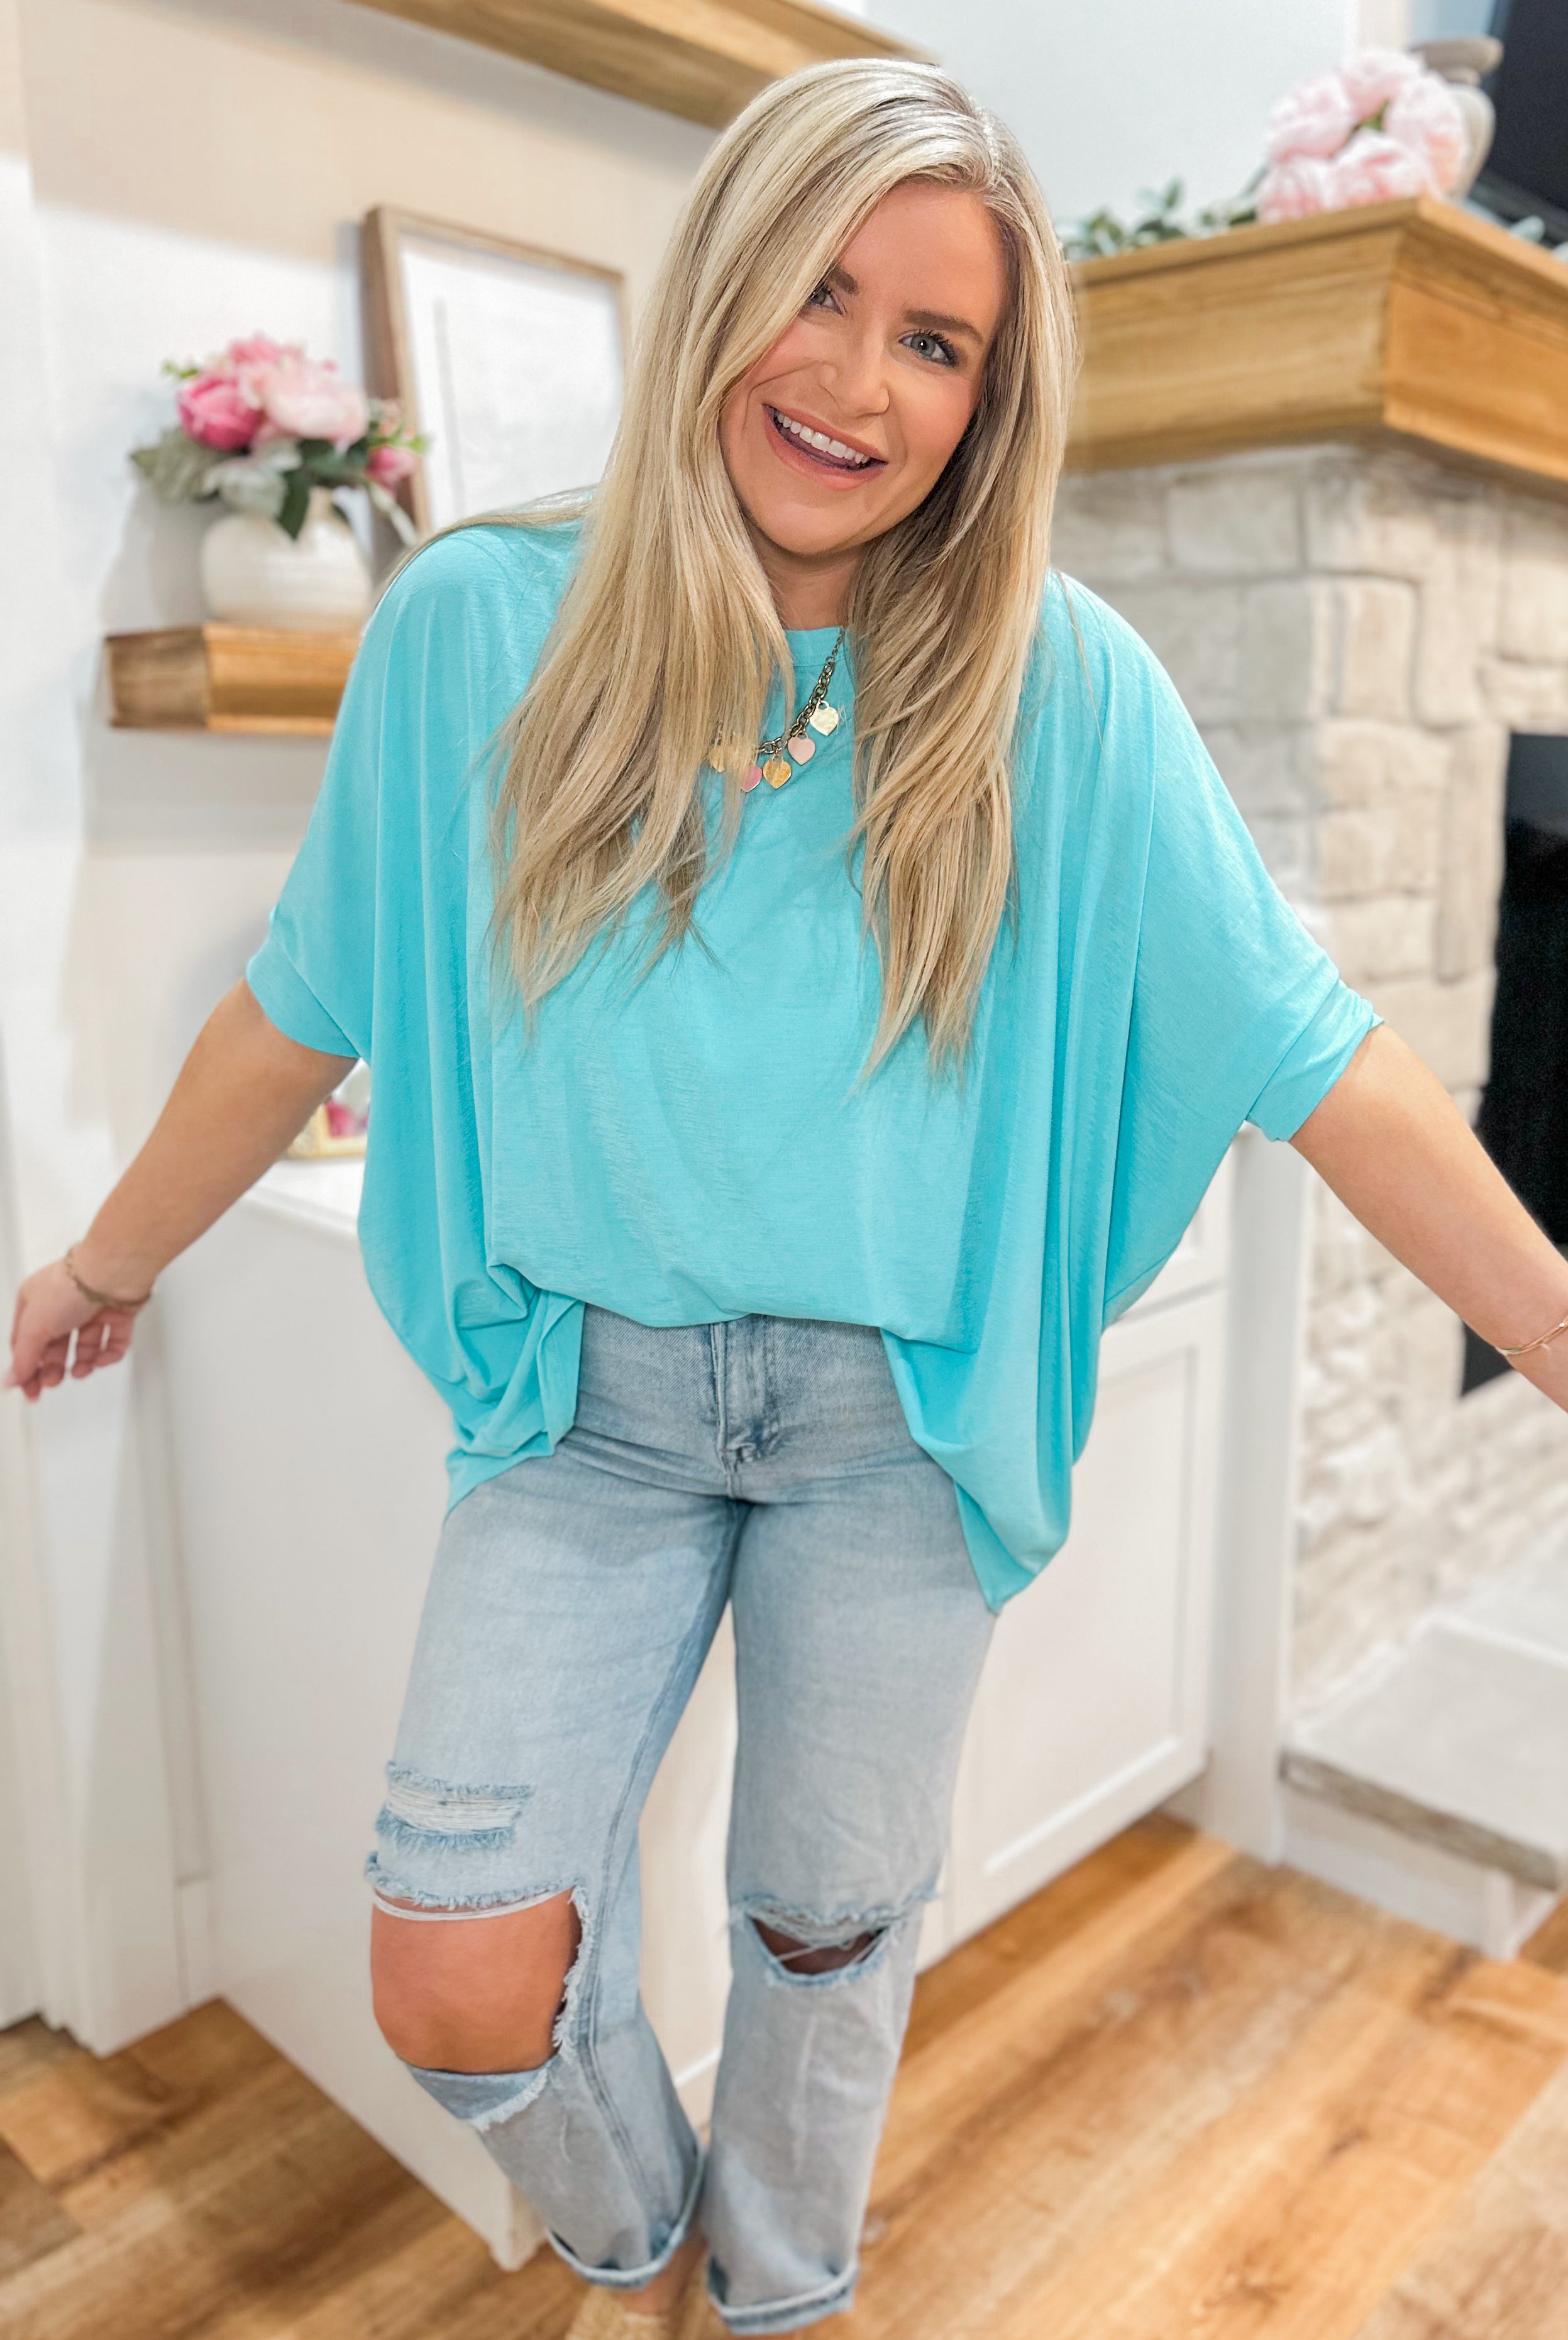 Nelly Wrinkle Free Tunic Top - Be You Boutique